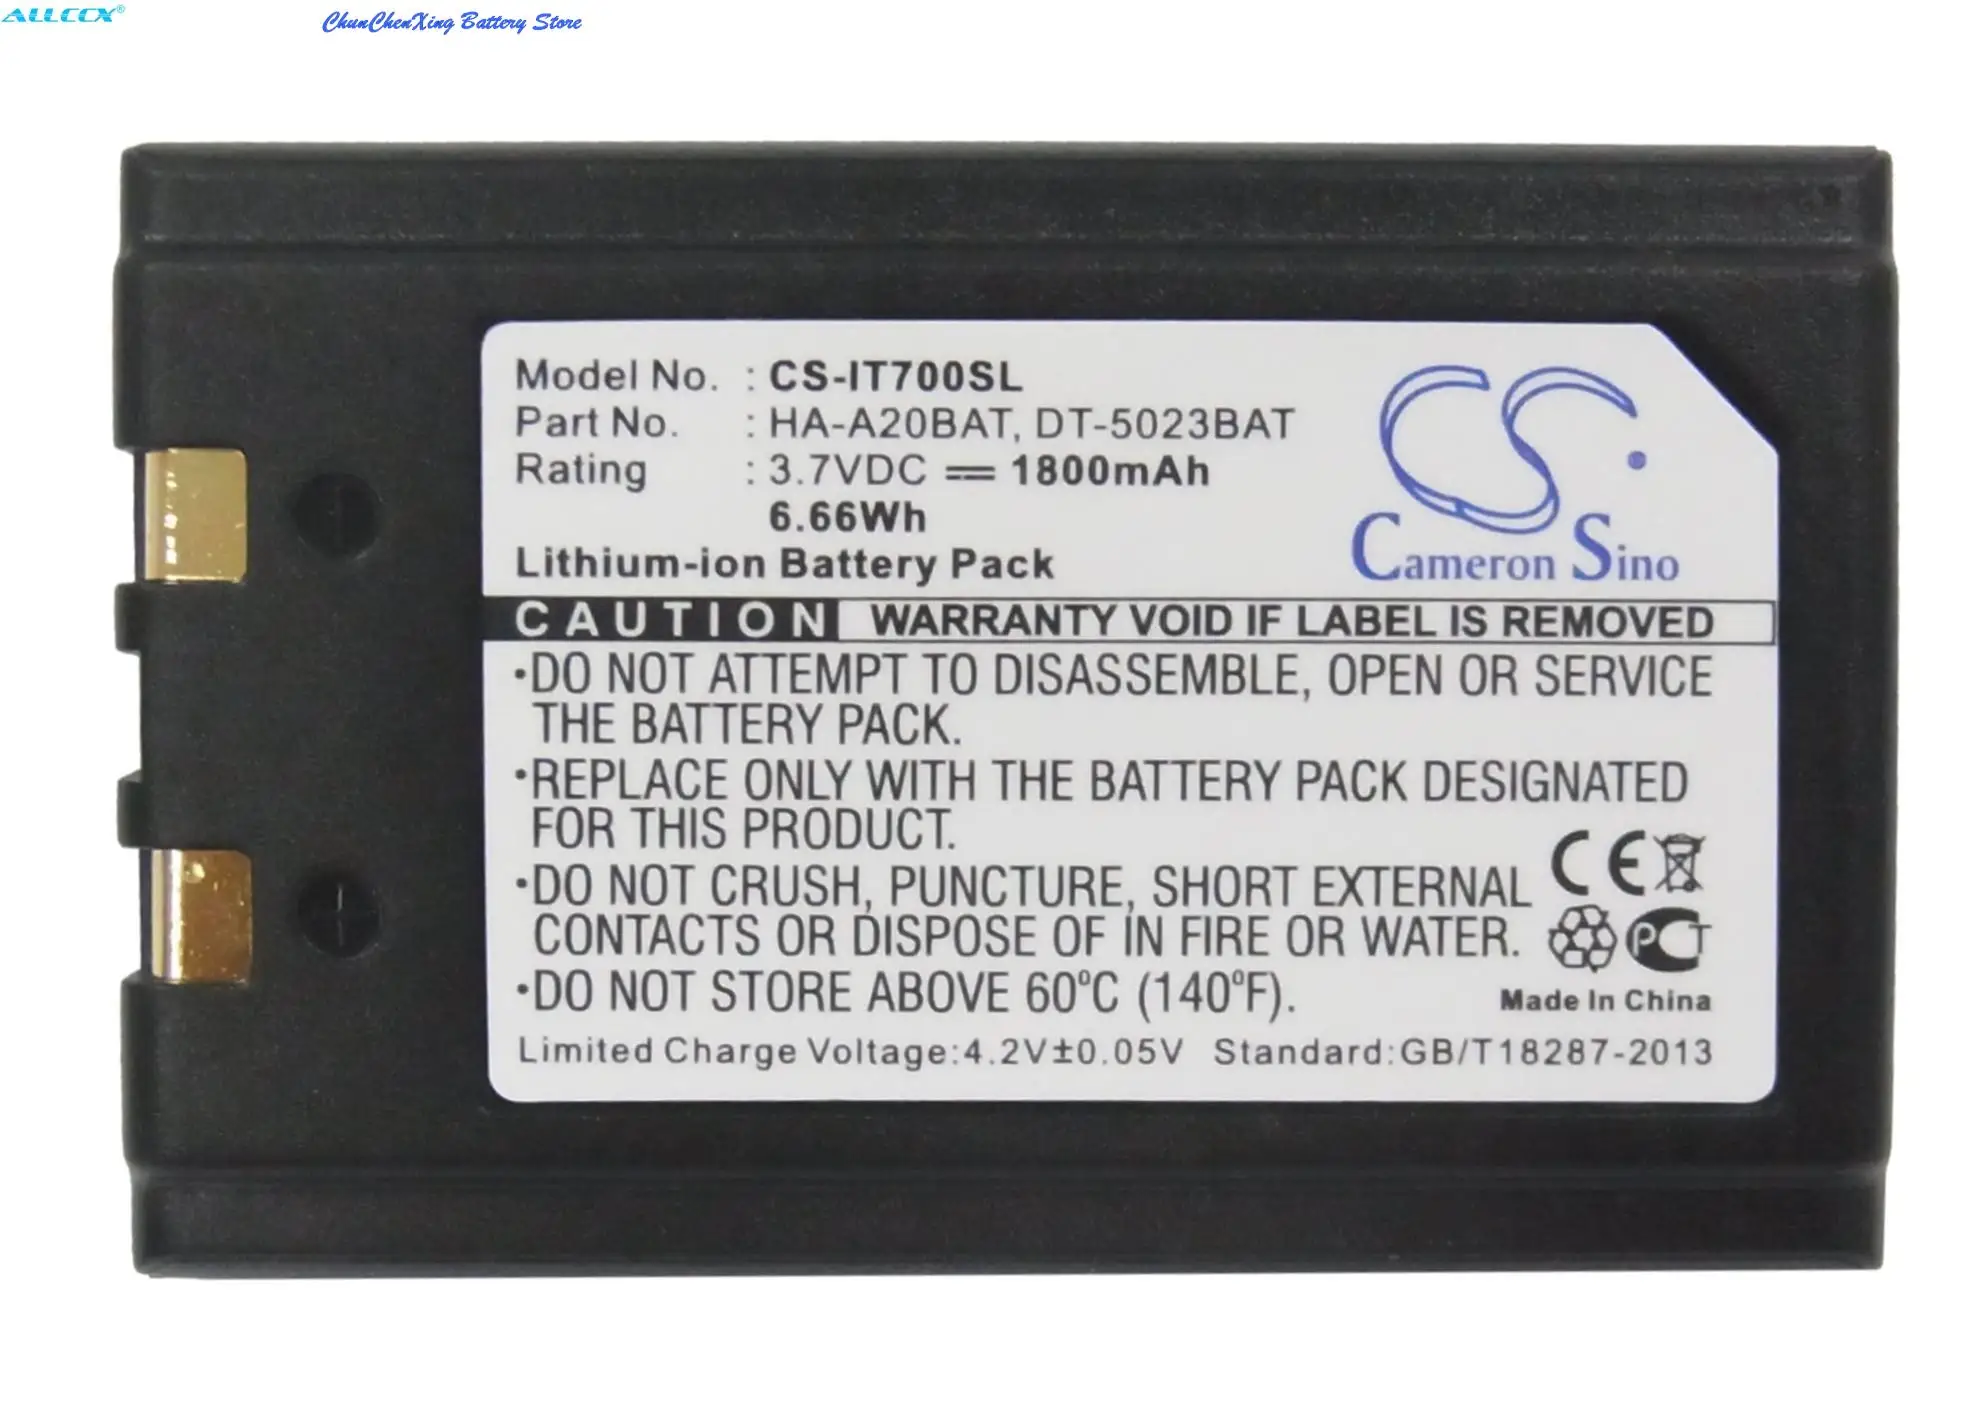 

Cameron Sino 1800mAh Battery for Casio IT-700 M30,DT-5025LAT,DT-950,DT-X10,DT-X5,DT-X5M10E,DT-X5M30E,DT-X5M30R,DT-X5M30U